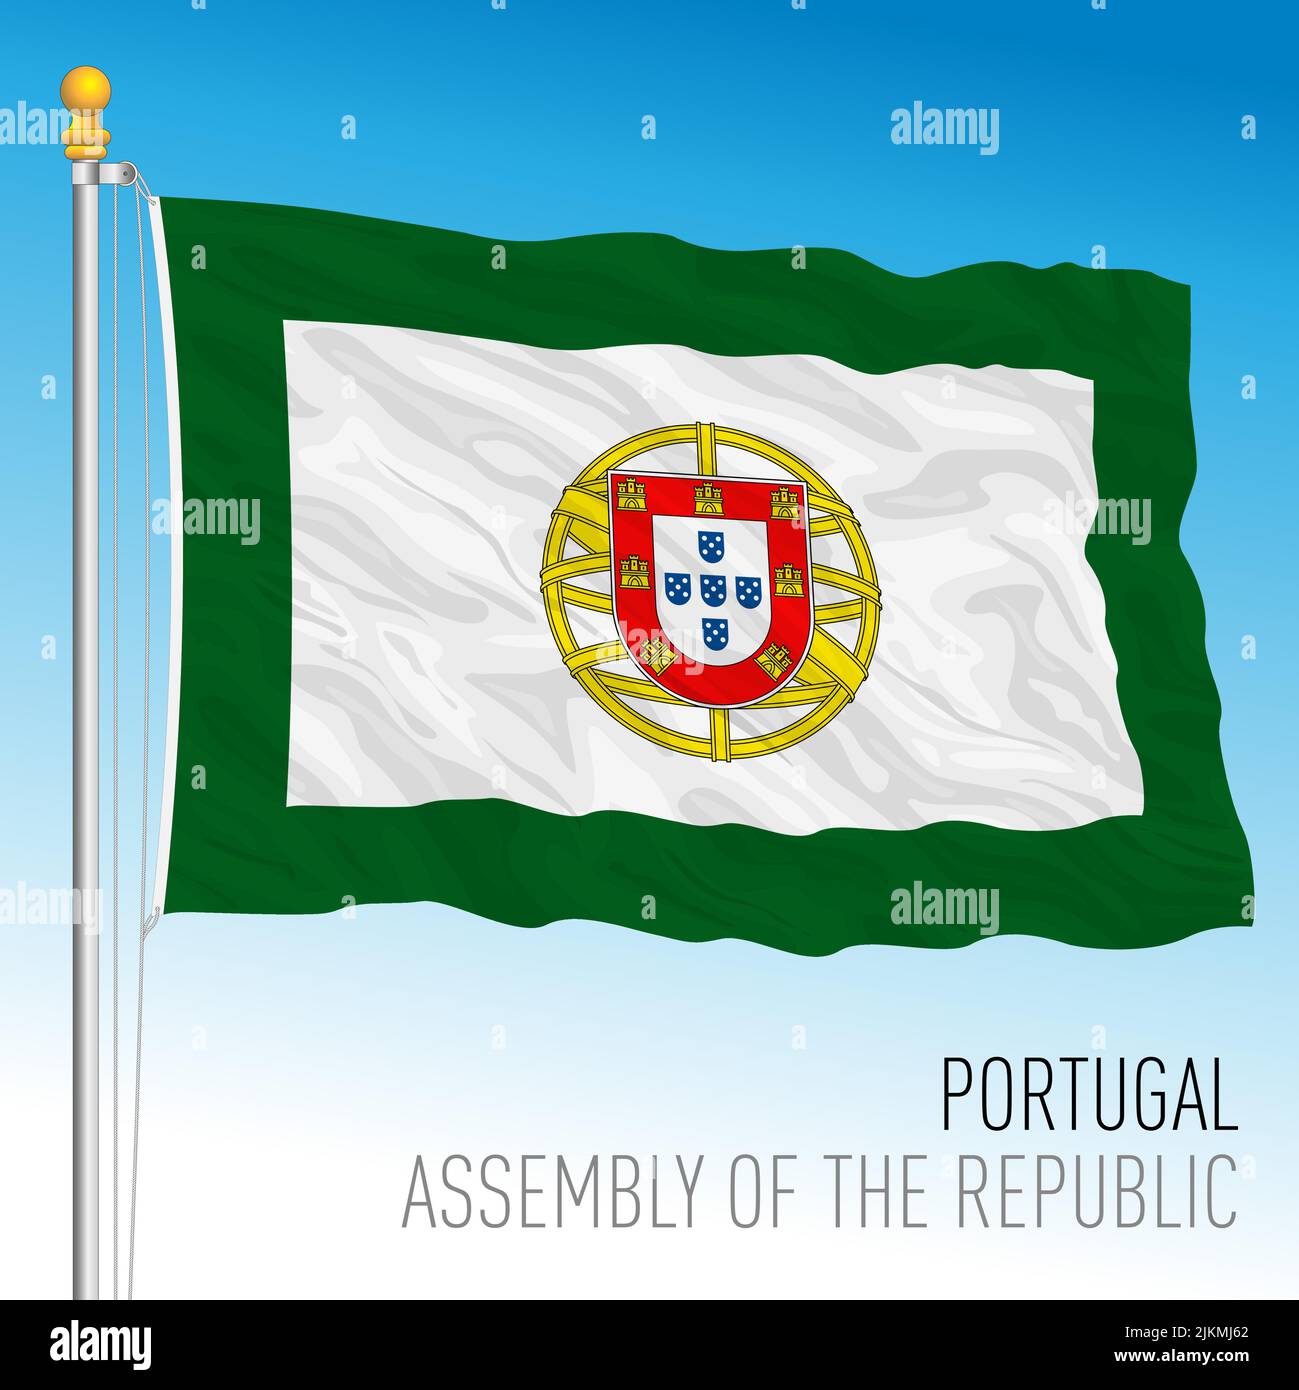 Portugal, Assembly of the Republic flag, European Union, vector illustration Stock Vector